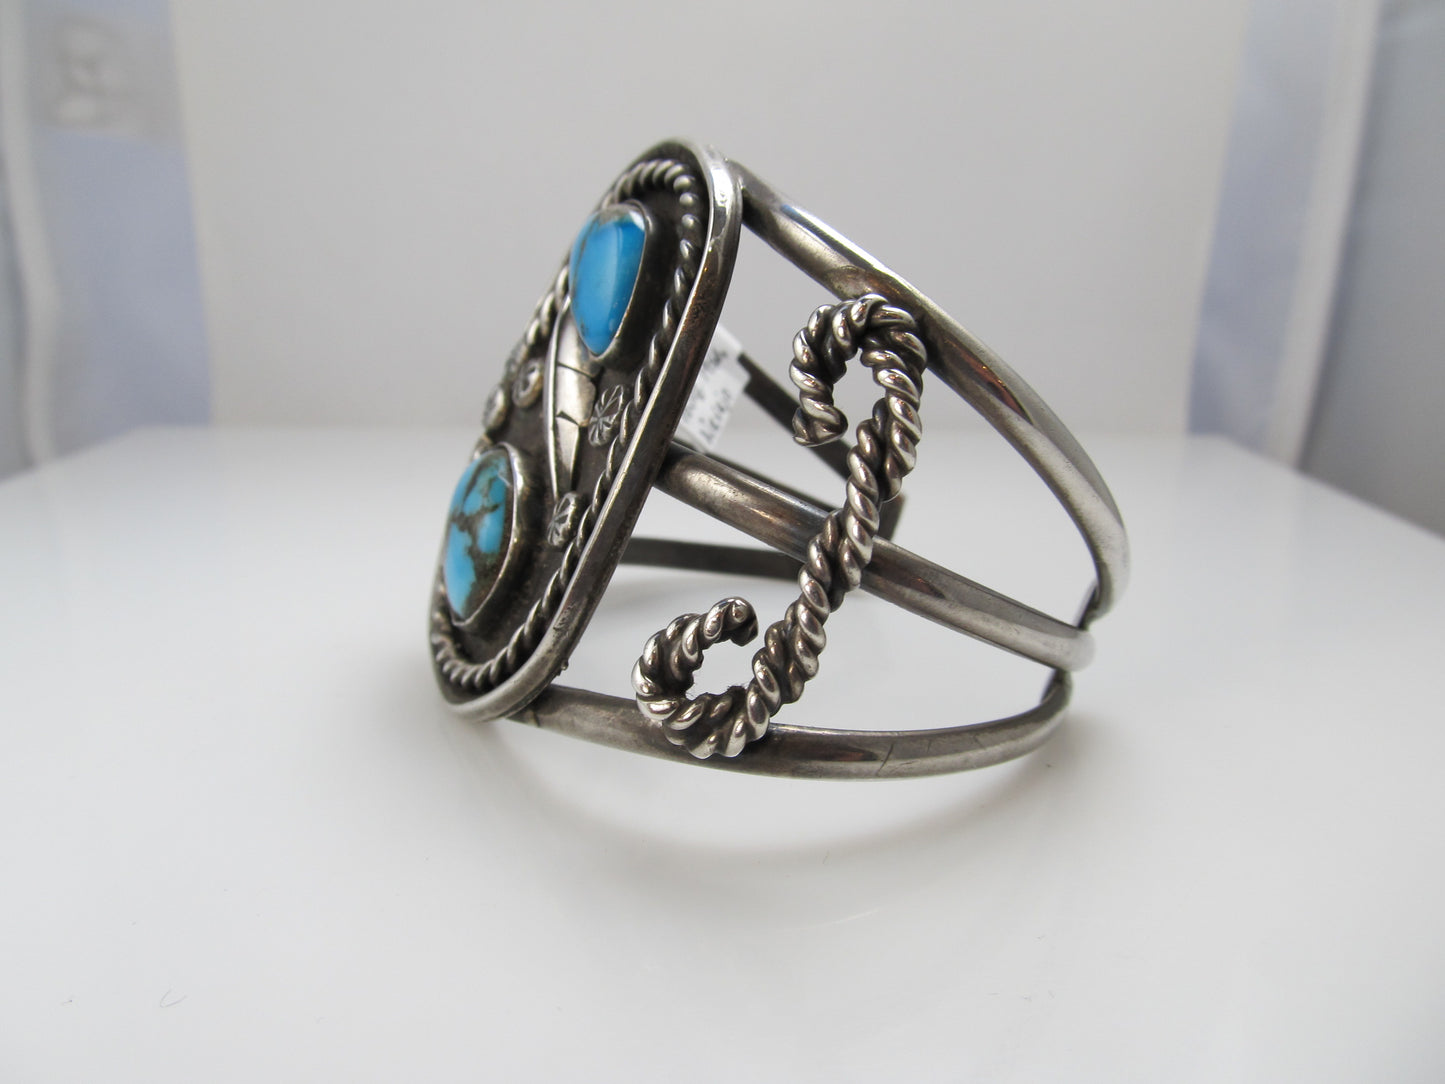 Vintage Sterling Silver Navajo Cuff Bracelet With Turquoise